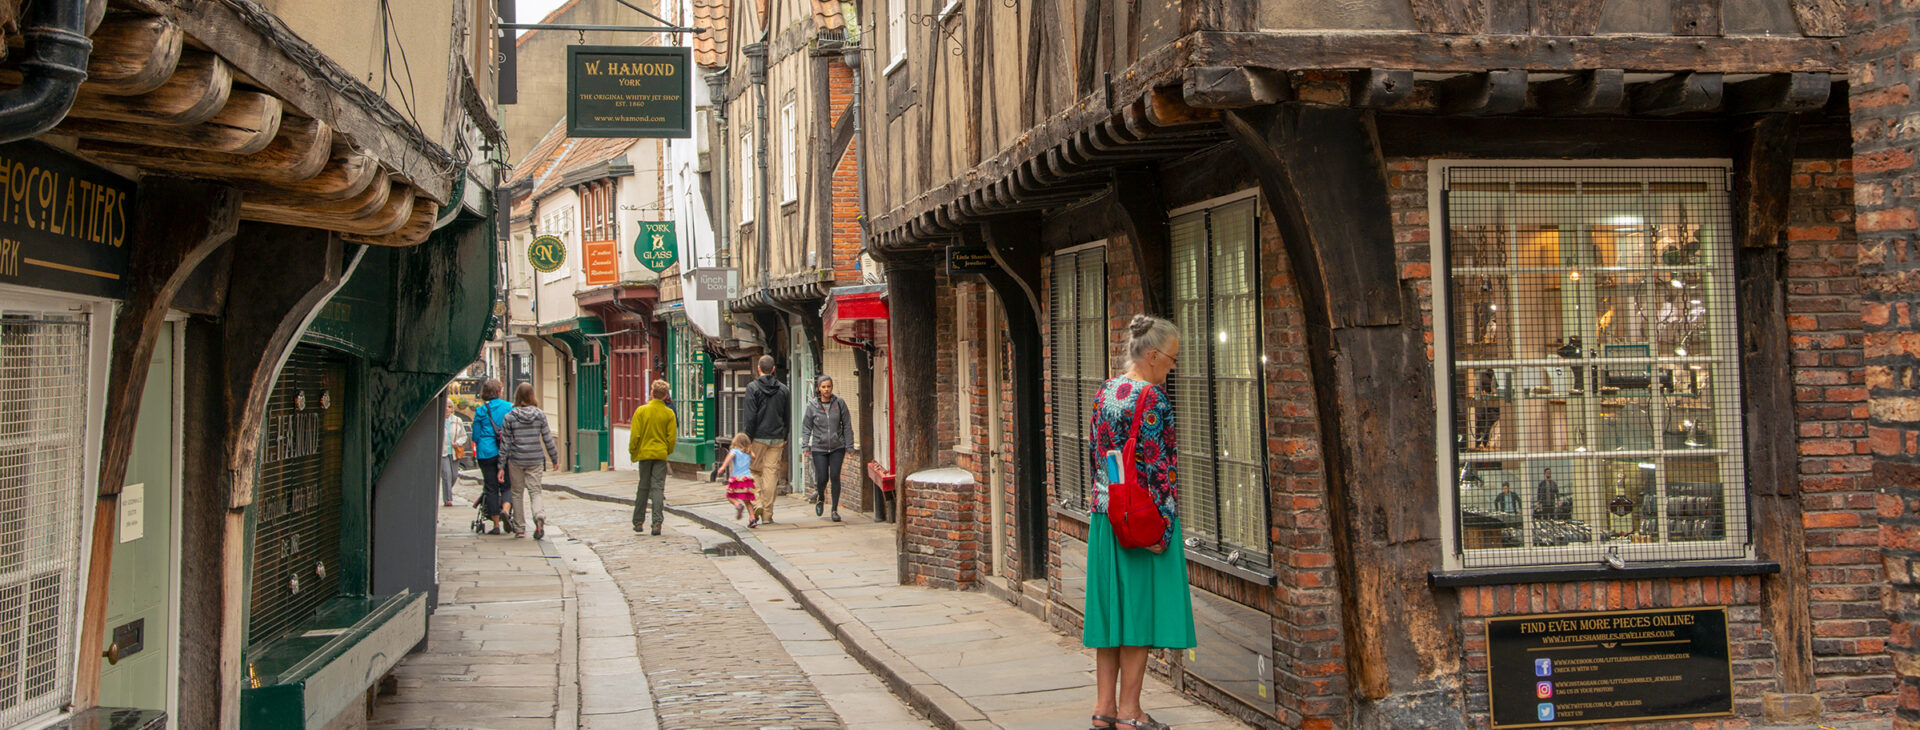 picturesque small medieval shopping street lined by crooked overhanging timber-framed buildings